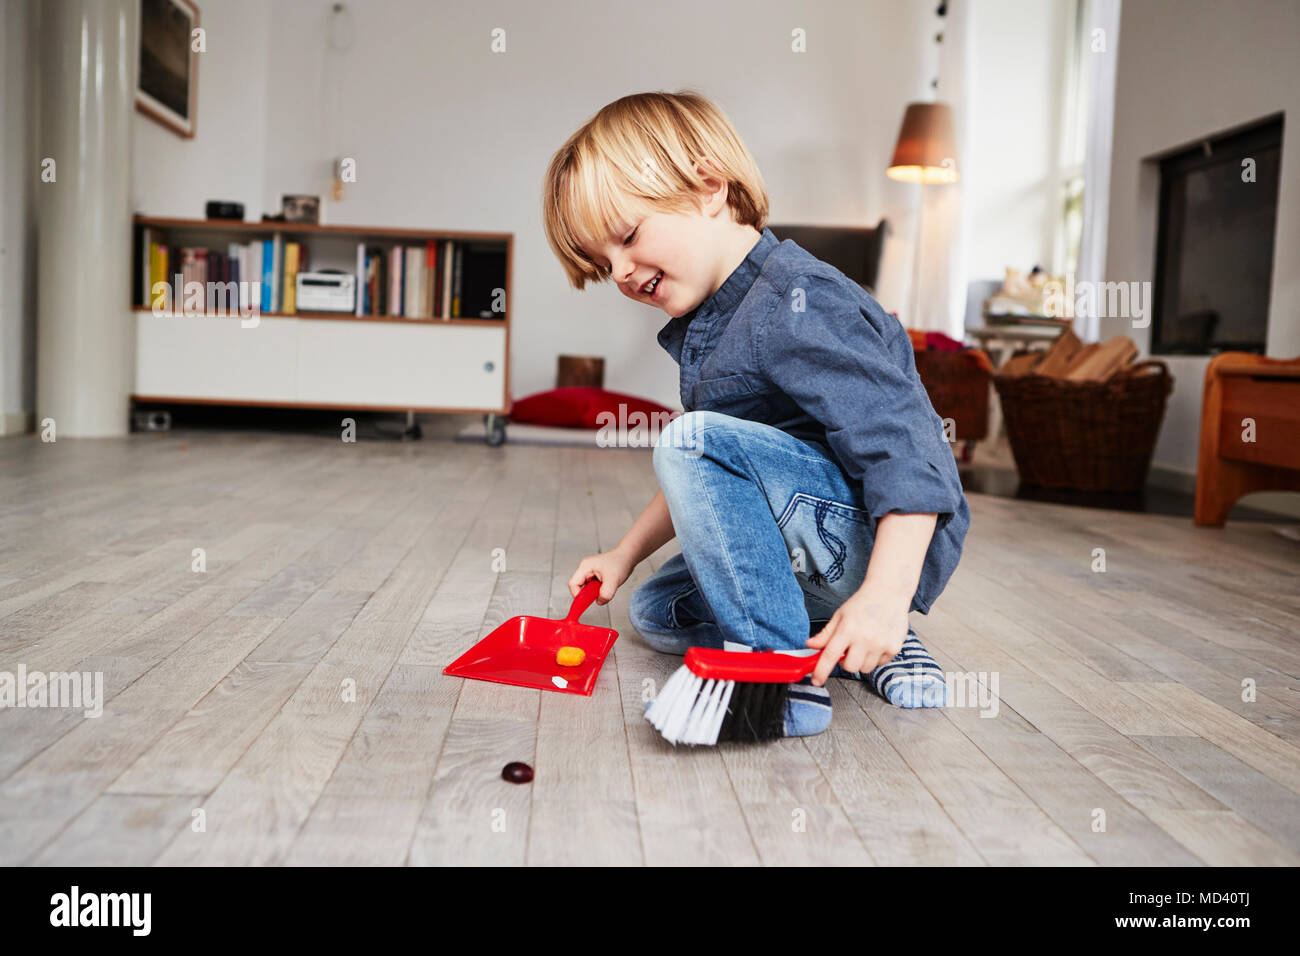 Young boy playing with toy dustpan and brush Stock Photo